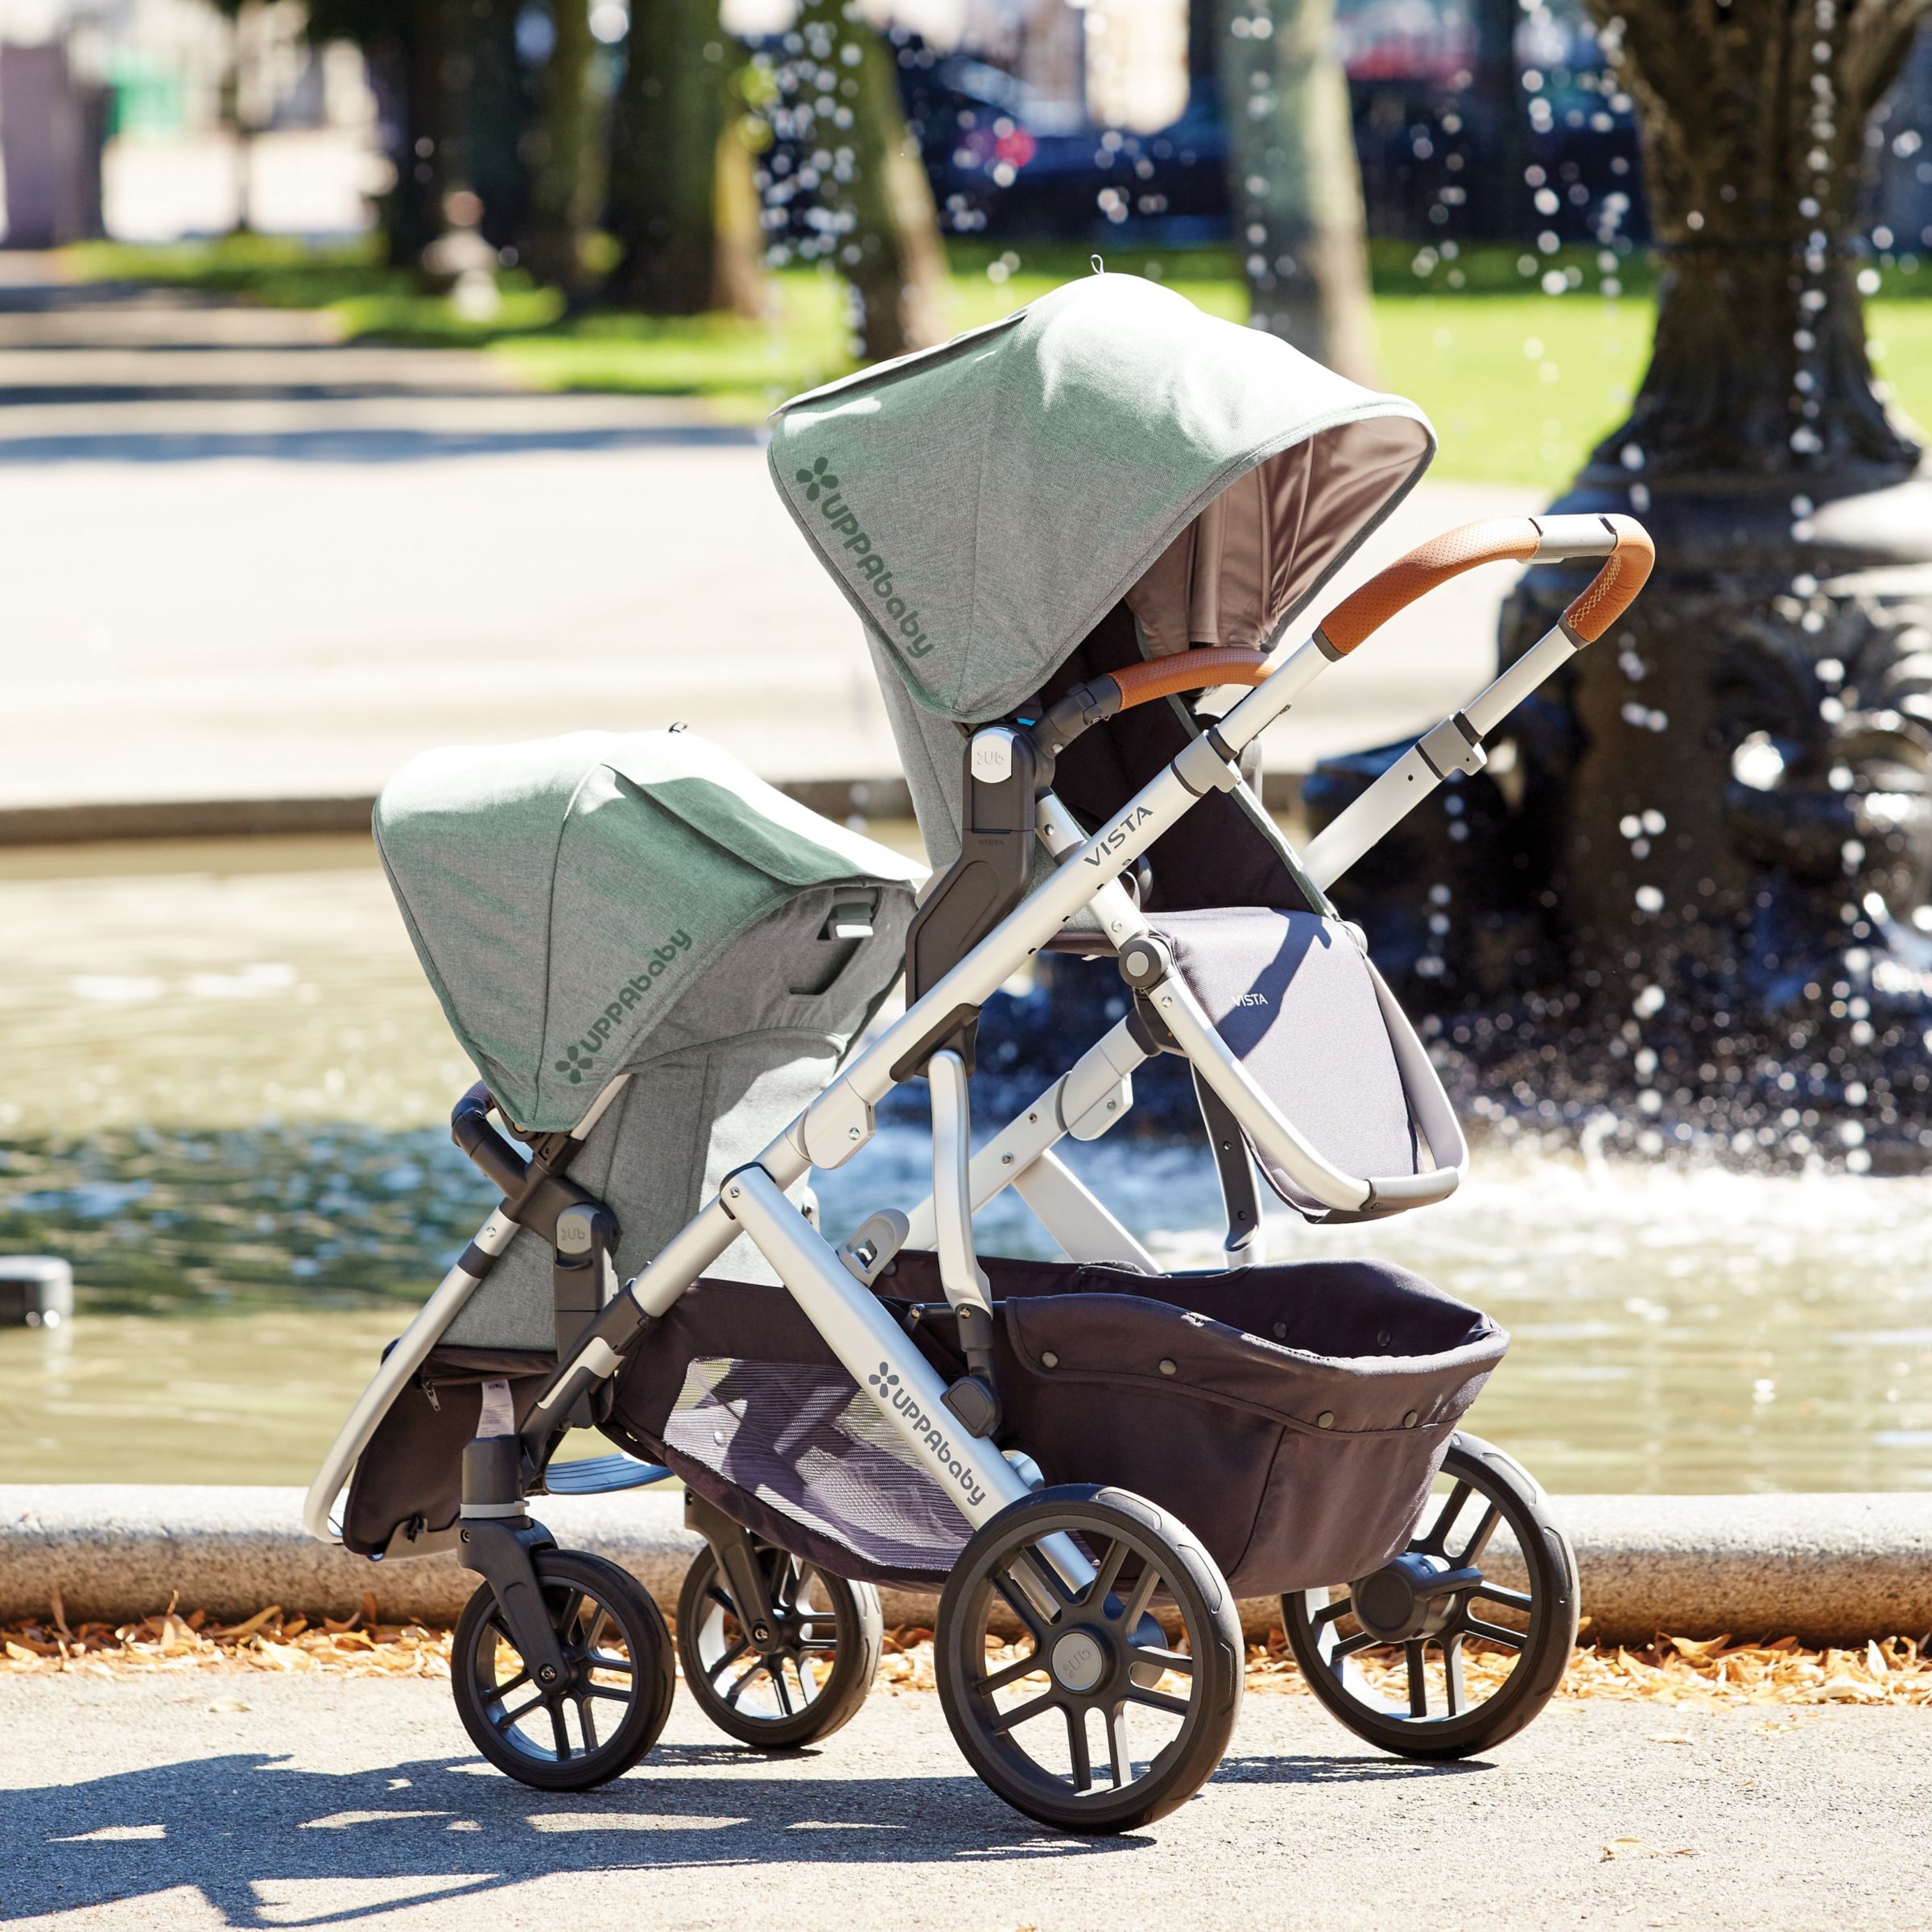 uppababy rumble seat sale